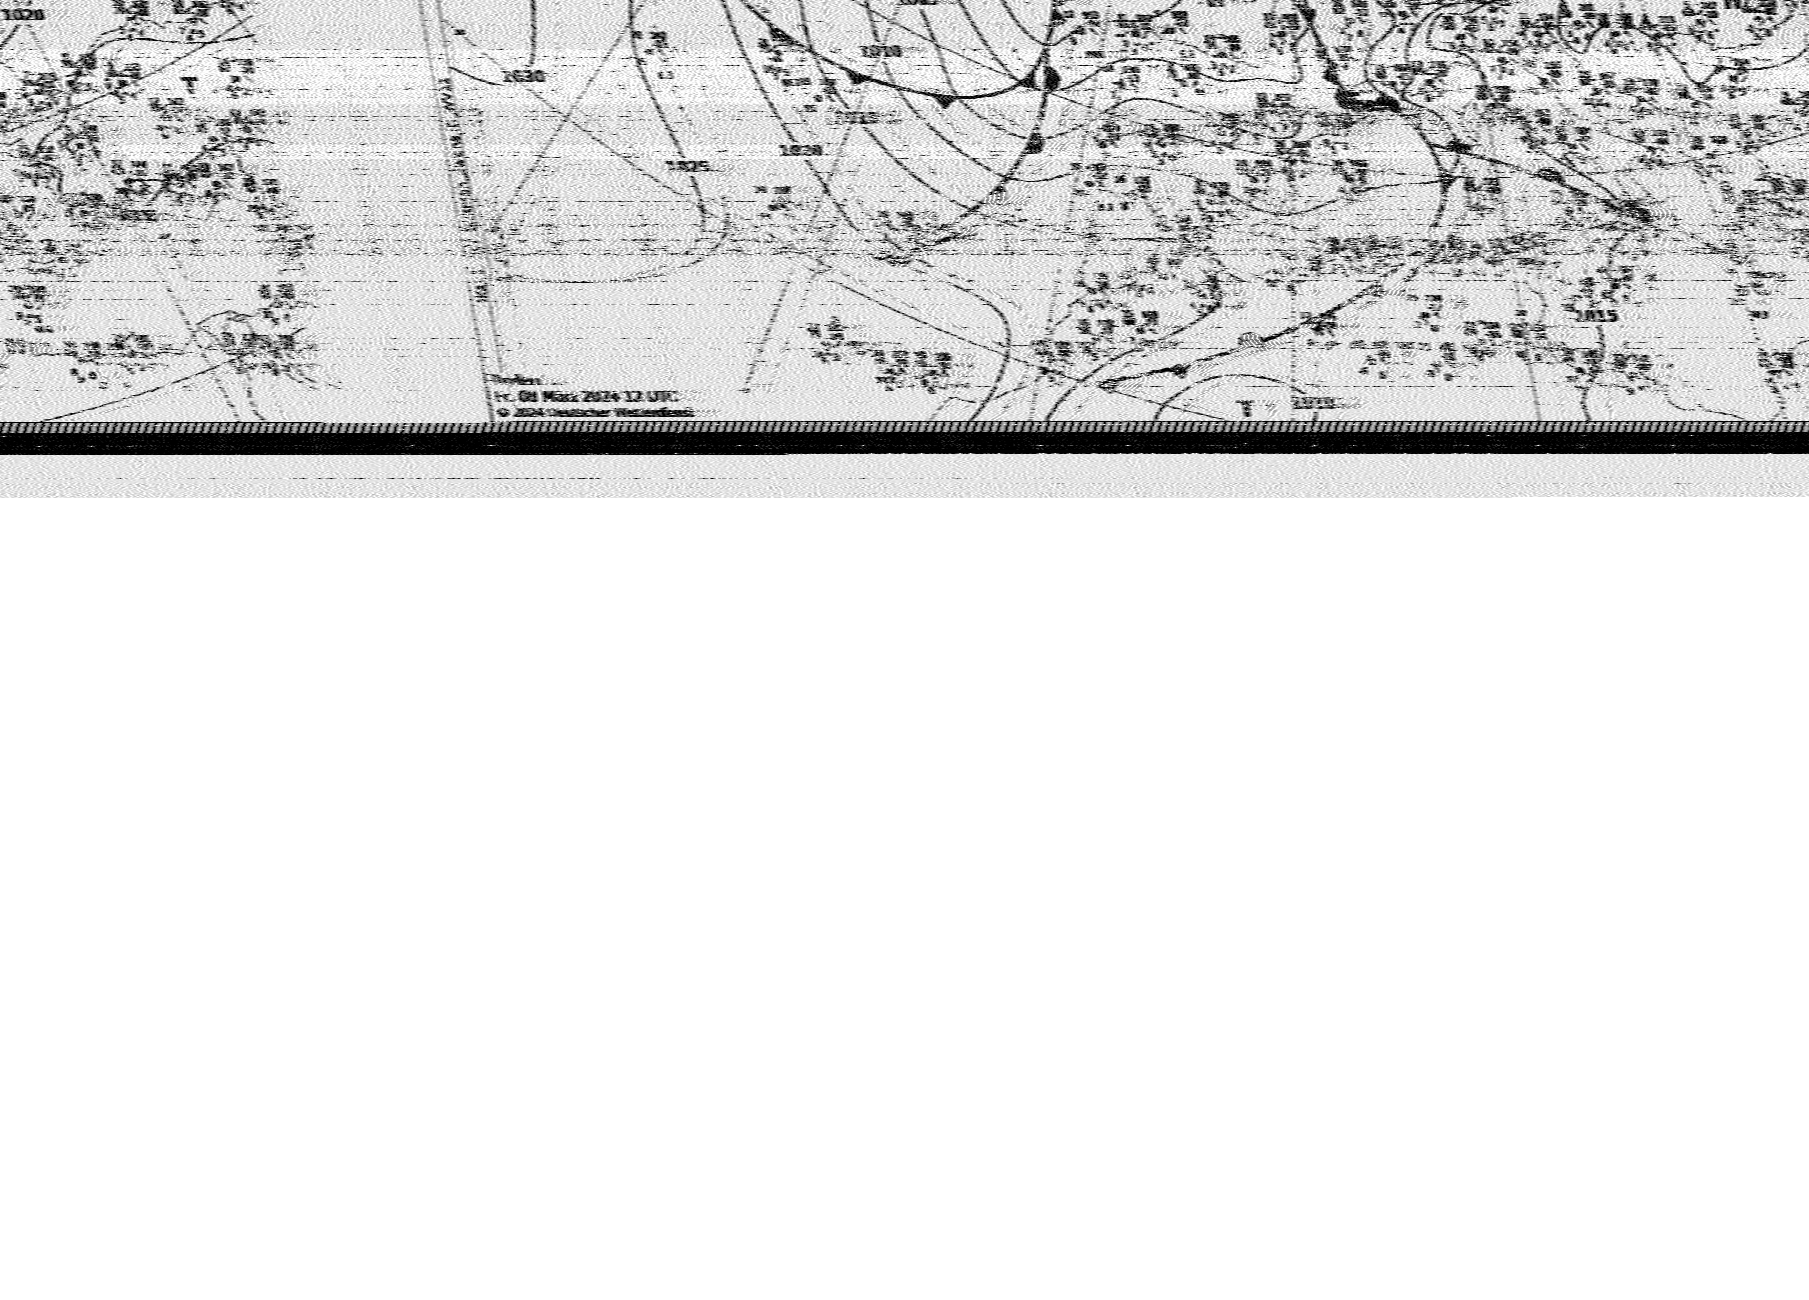 A partial map with pressure lines on it. Number's are hard to read. At the bottom, there's today's date, and a copyright note by the Deutscher Wetterdienst.